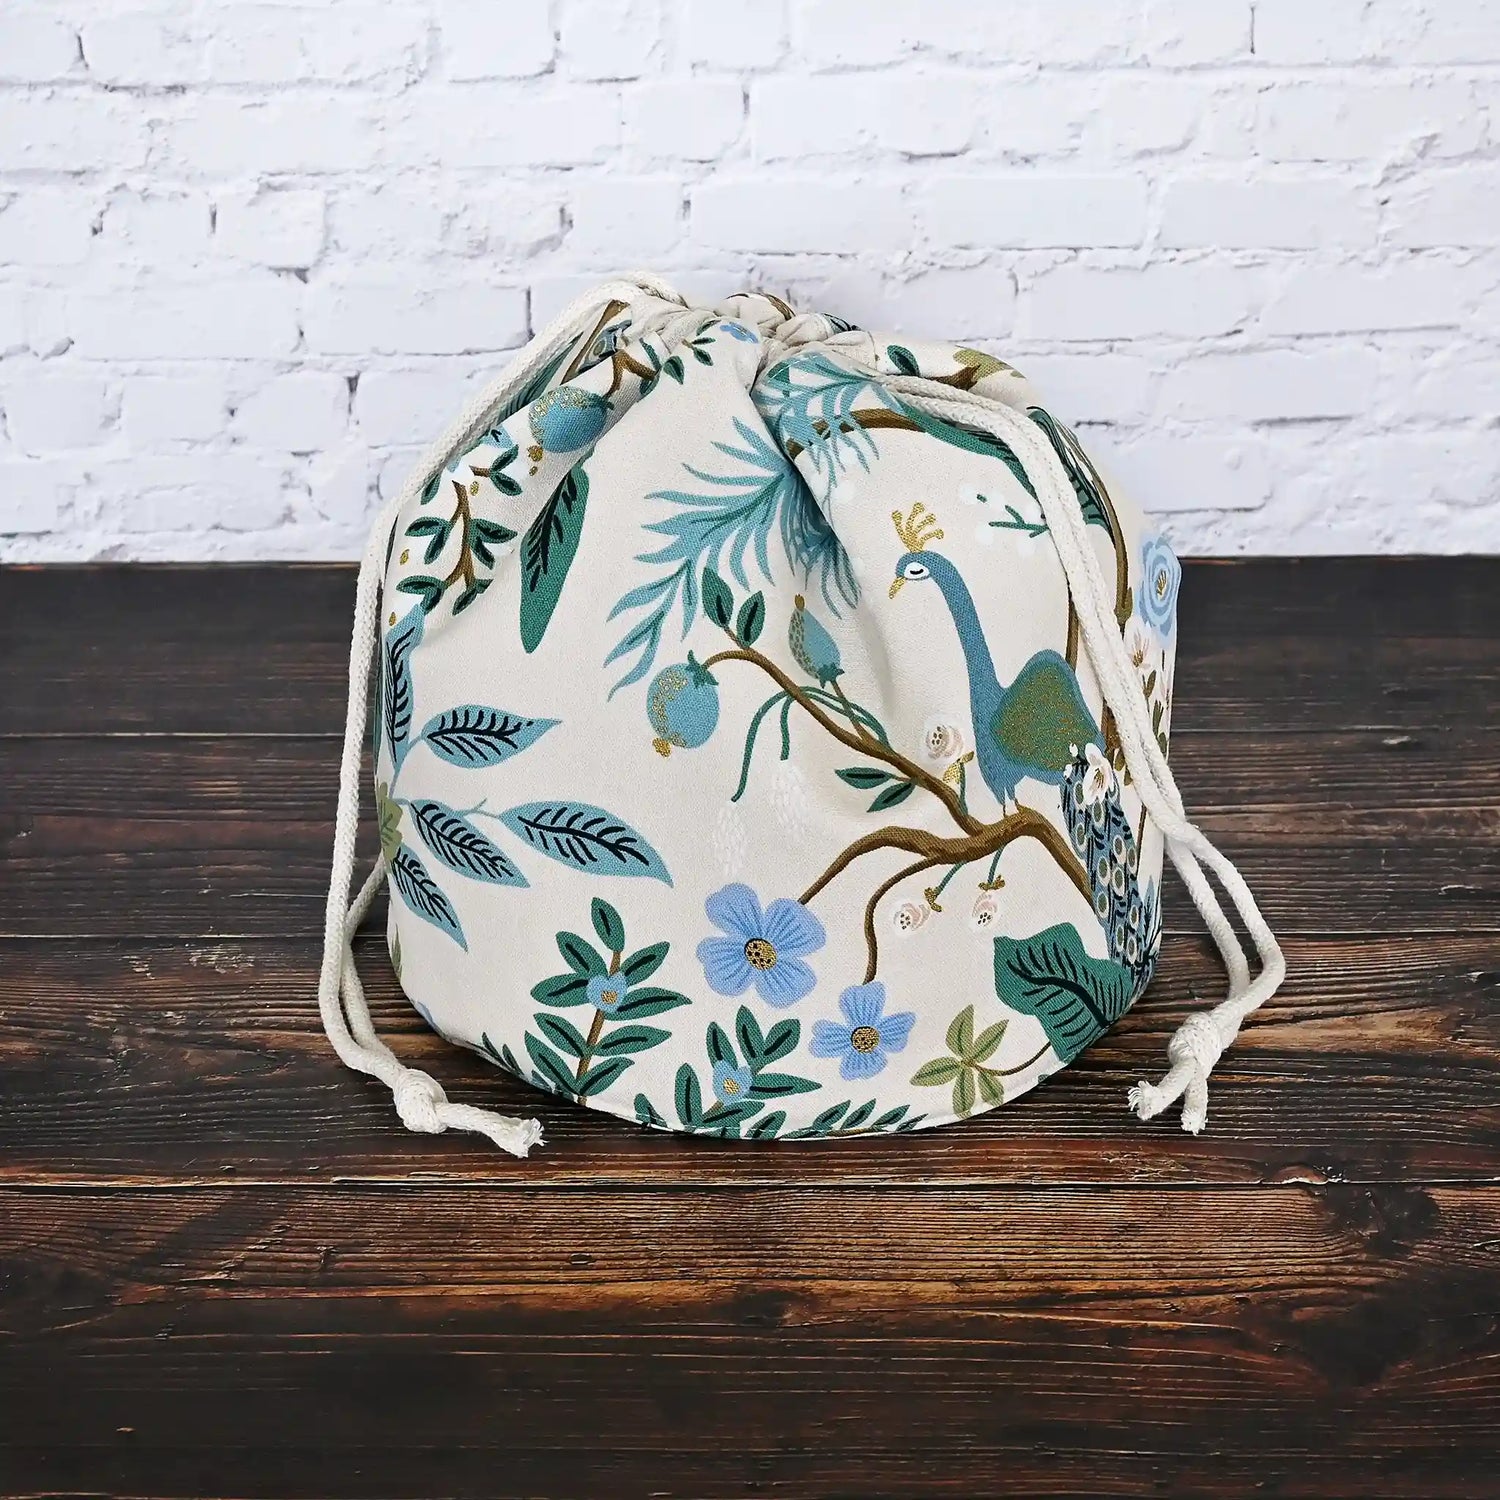 Beautiful canvas bucket bag in Rifle Paper Co's Antique Garden fabric, featuring green and teal florals and peacocks.  Made in Nova Scotia, Canada by Yellow Petal Handmade.